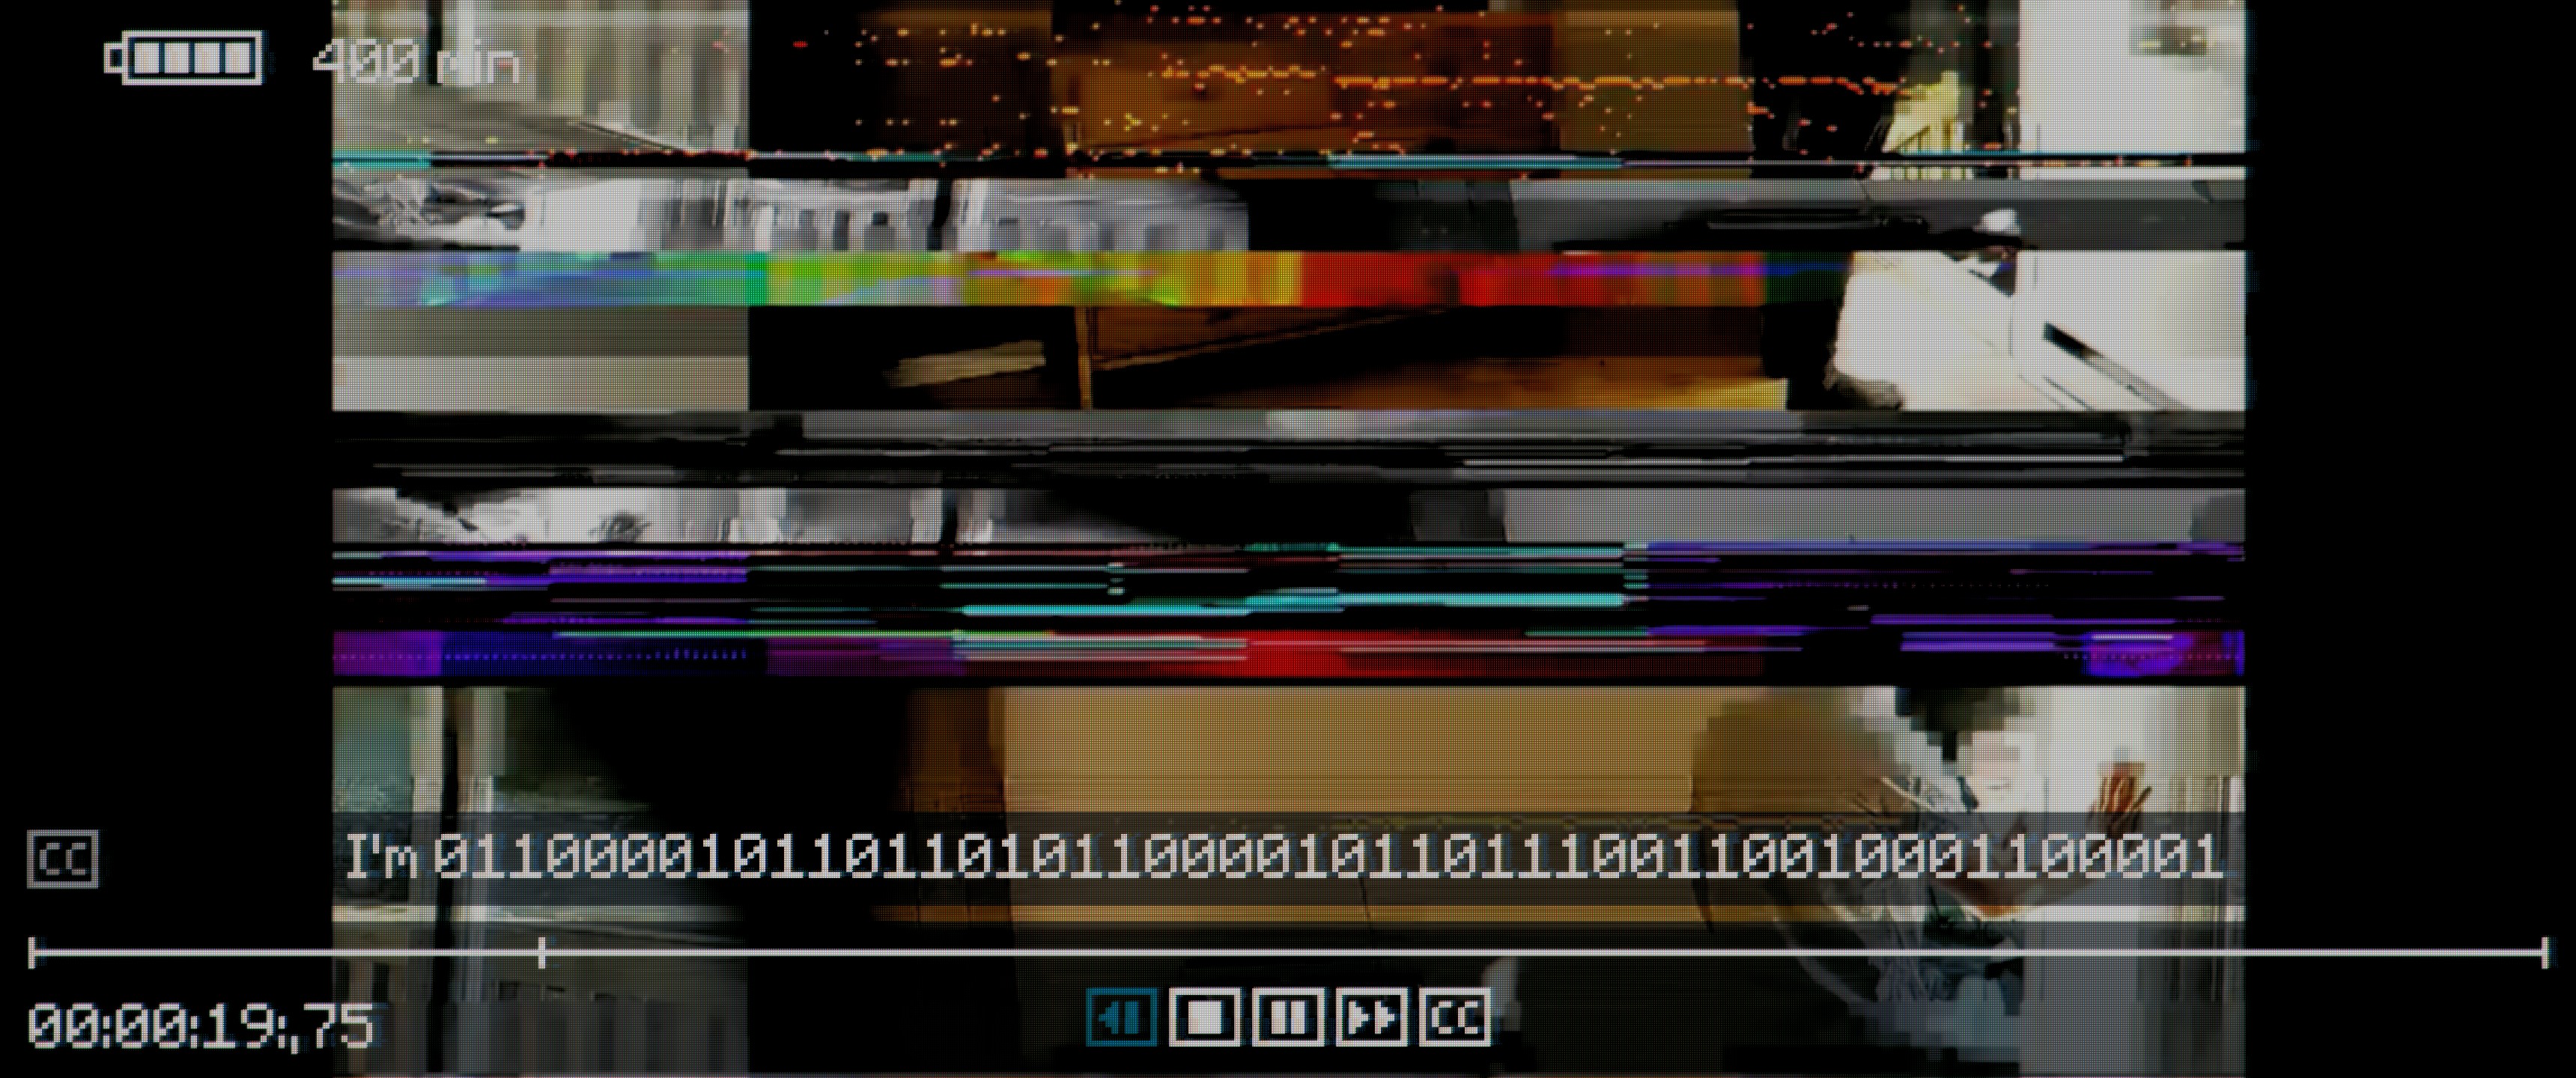 [Inscryption] Binary codes from videos image 7